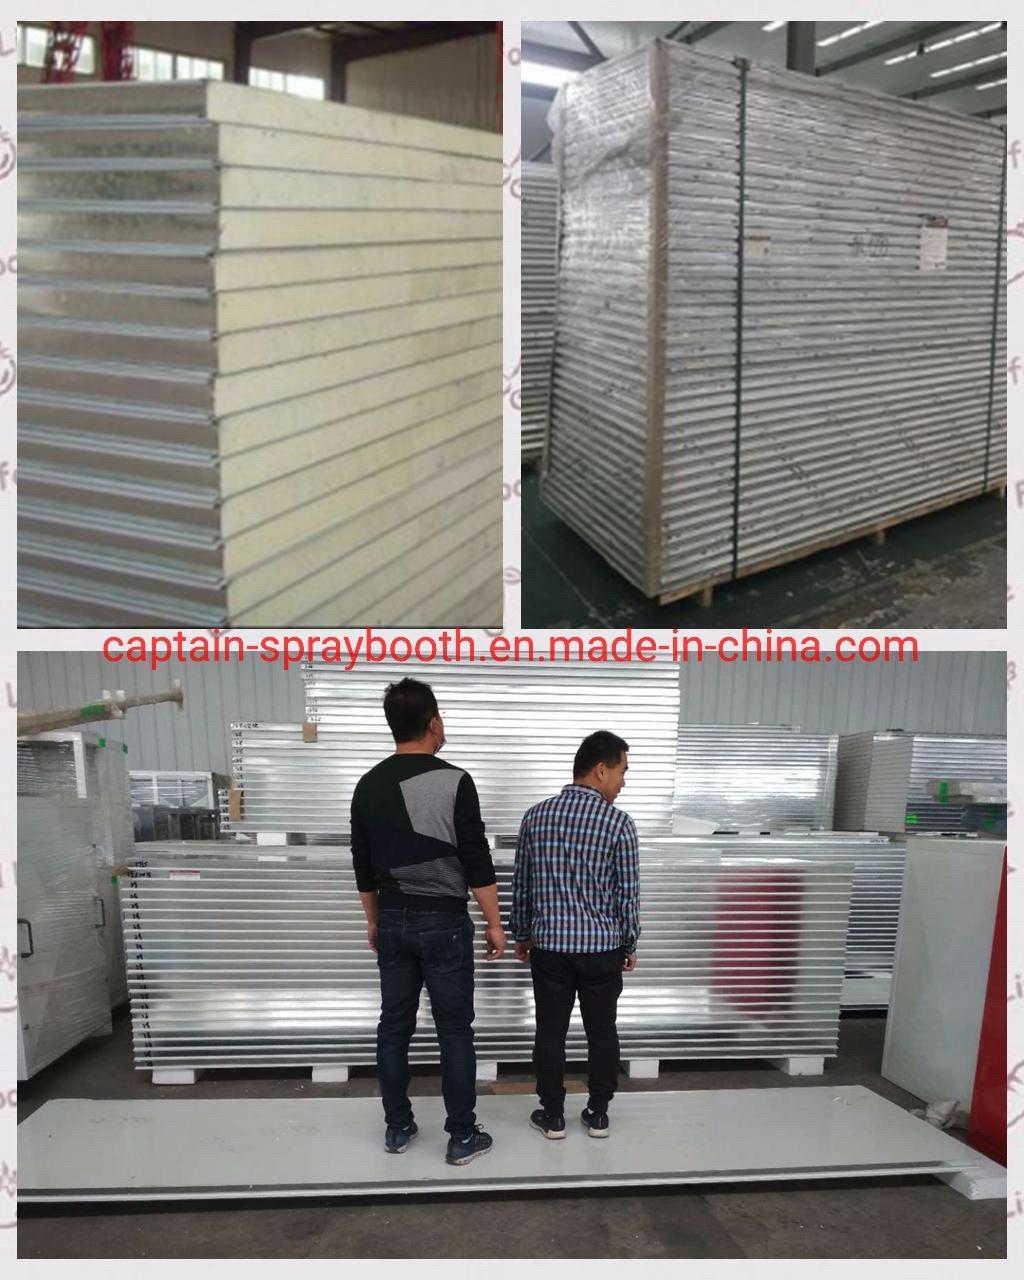 Automotive Paint Spray Booth / Car Spray Booth with Good Price